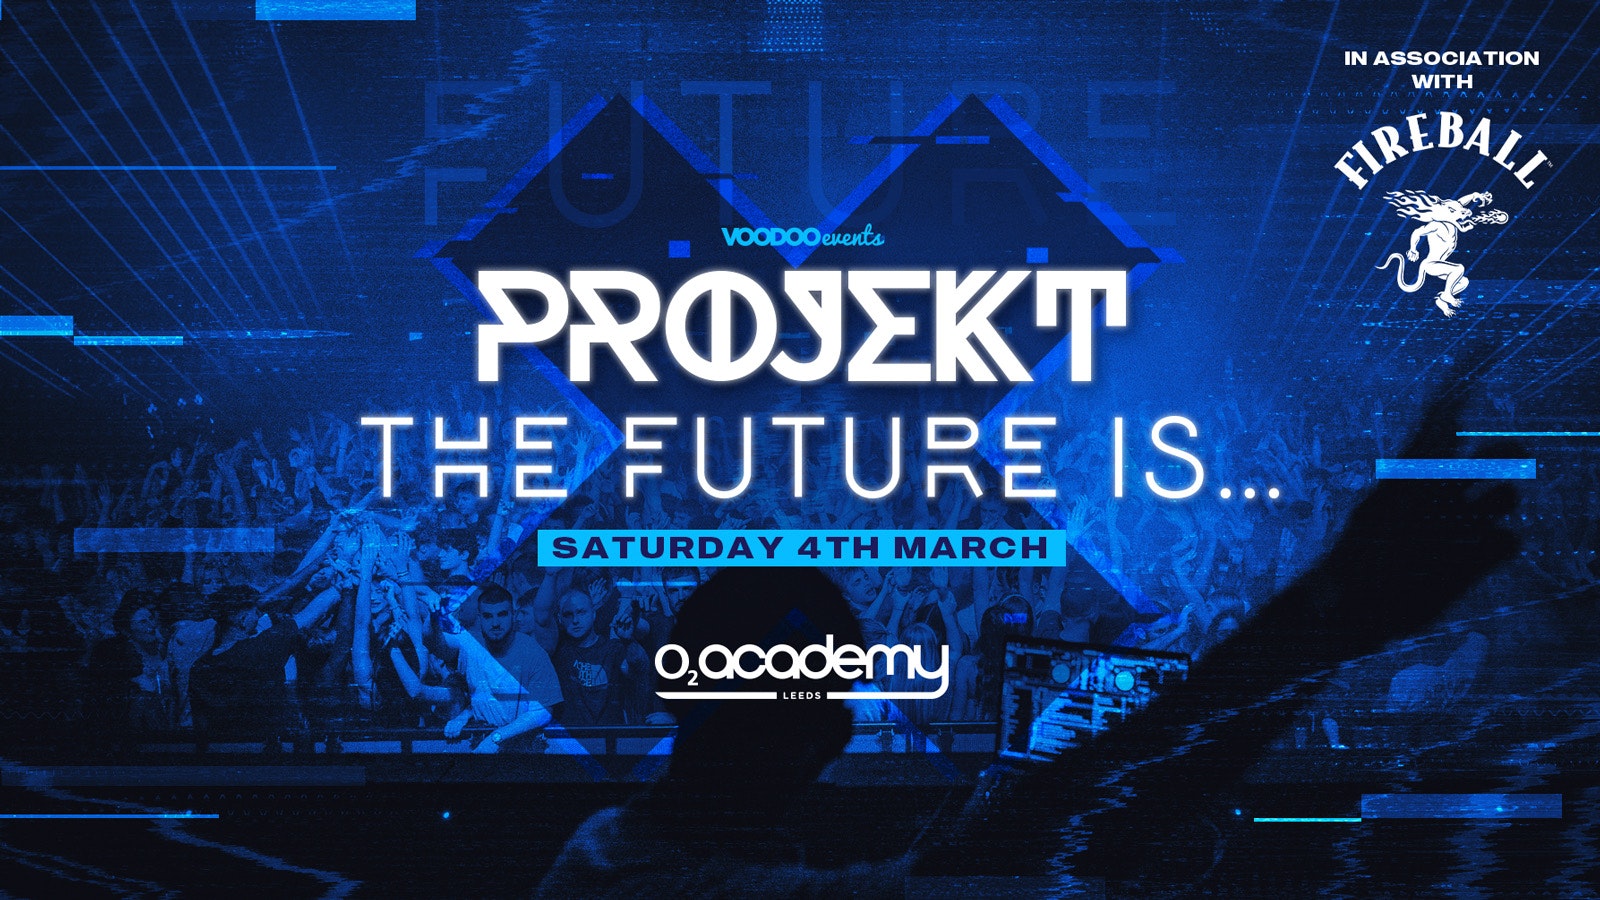 PROJEKT – Saturdays at O2 Academy The Future Is… in association with Fireball